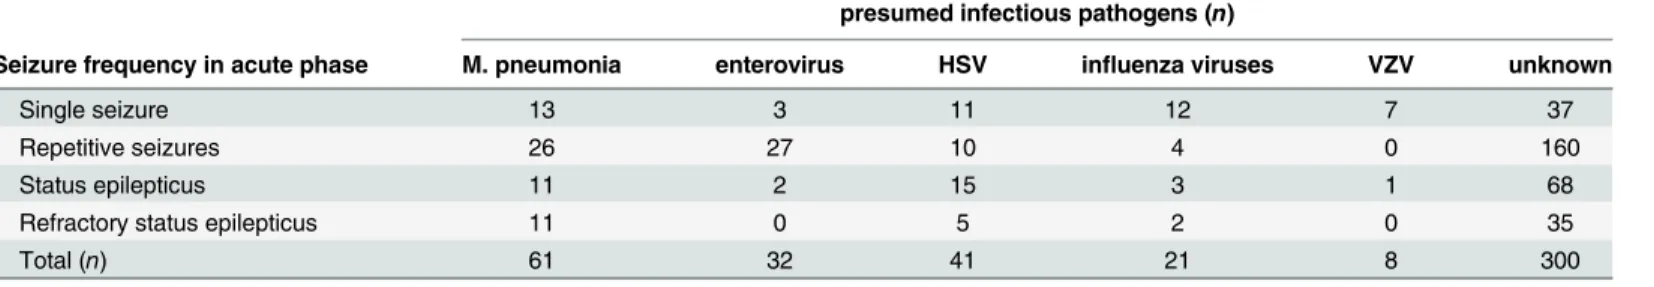 Table 1. The infectious pathogens of 463 children with different seizure frequency in acute phase.